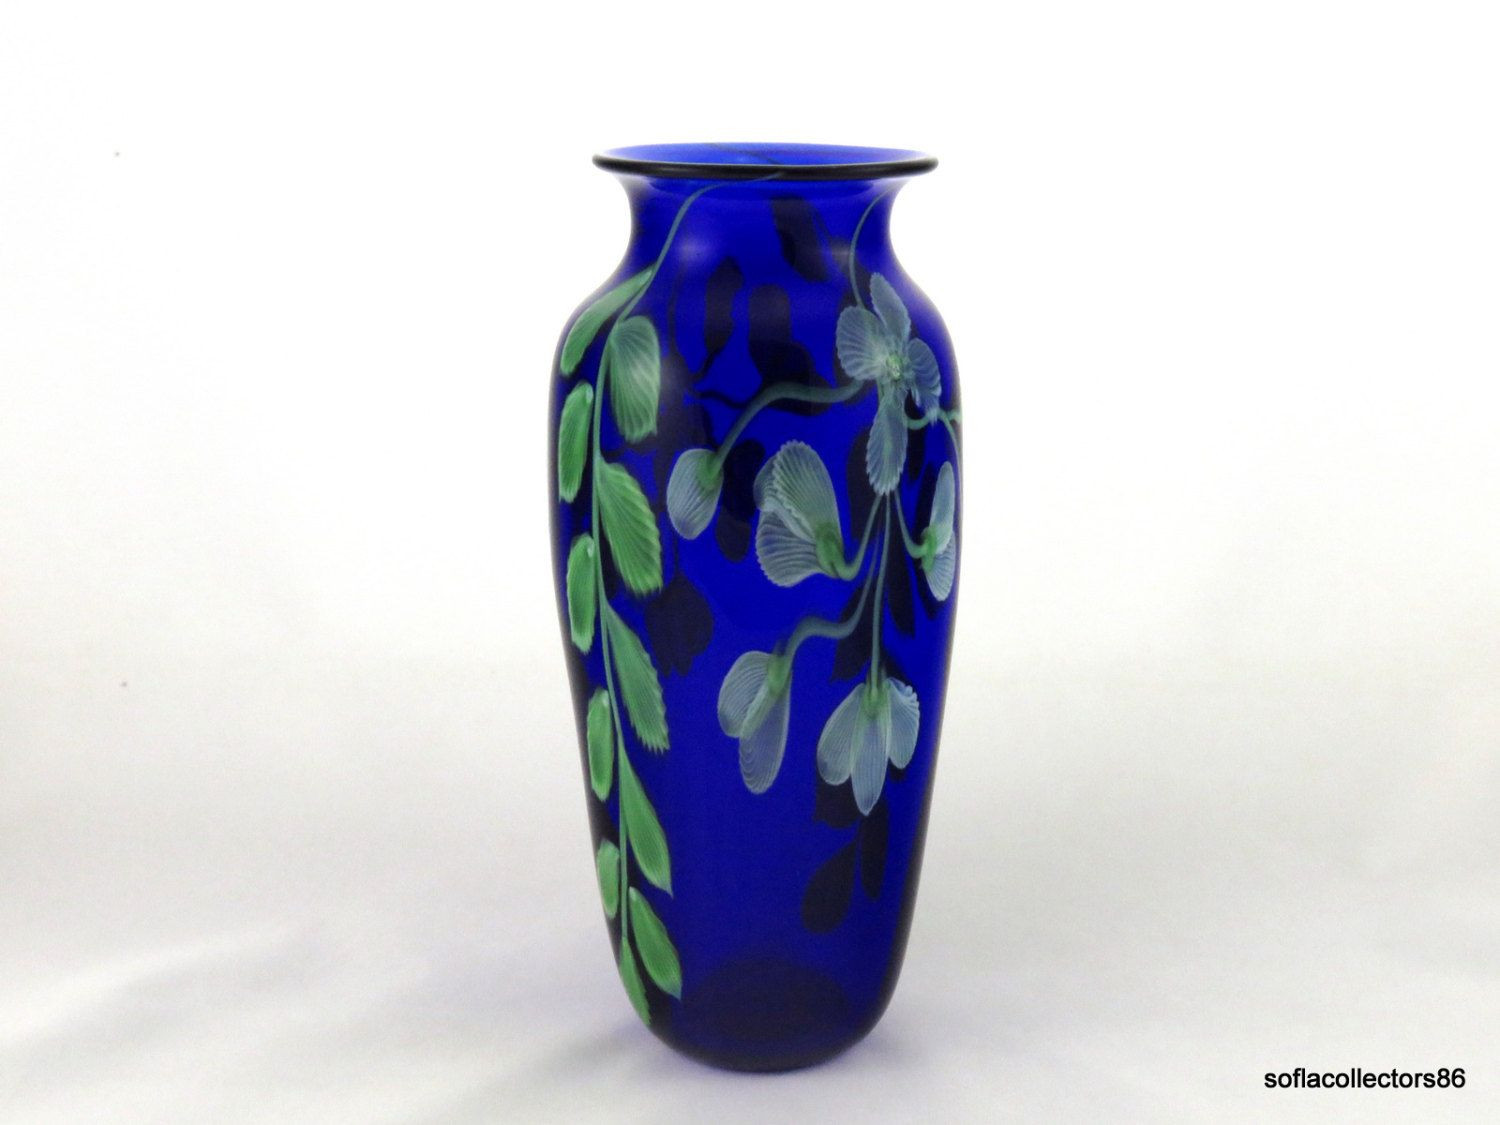 23 attractive Rueven Art Glass Vase 2024 free download rueven art glass vase of orient flume leafy floral in transparent cobalt vase 1984 signed inside orient flume leafy floral in transparent cobalt vase 1984 signed and dated by soflacollectors